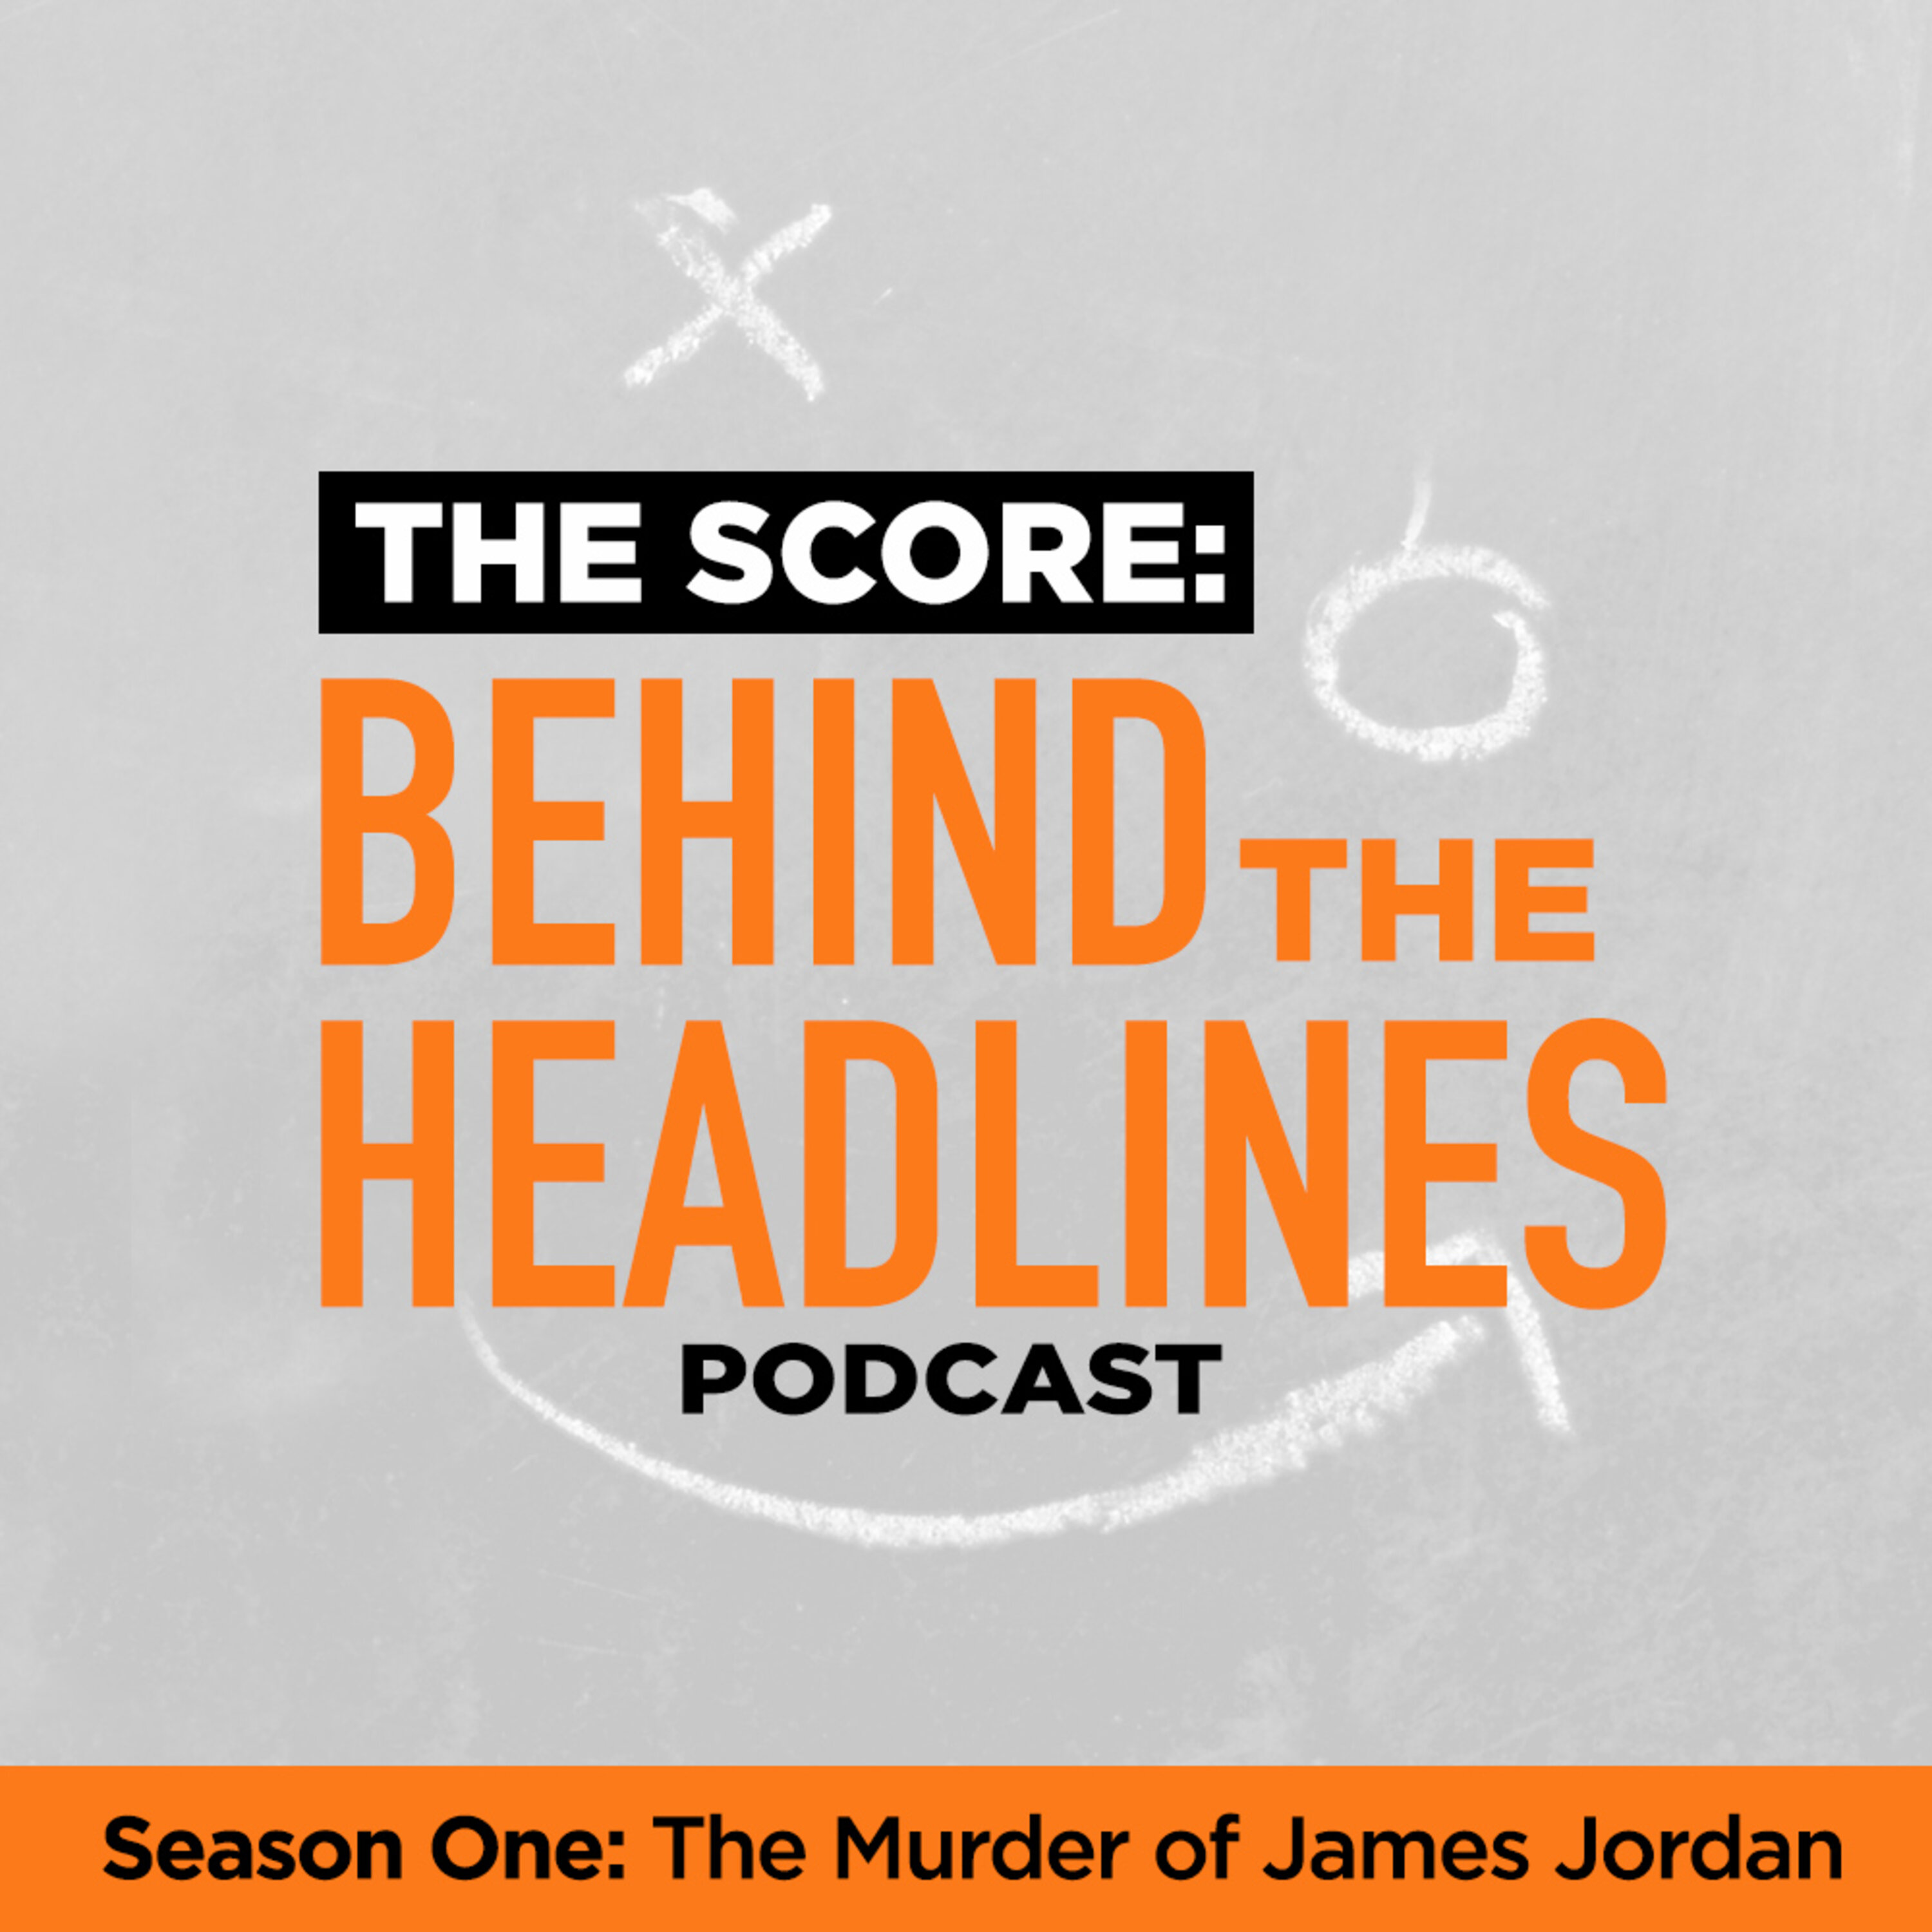 Here's What I Think Happened: The Murder of James Jordan